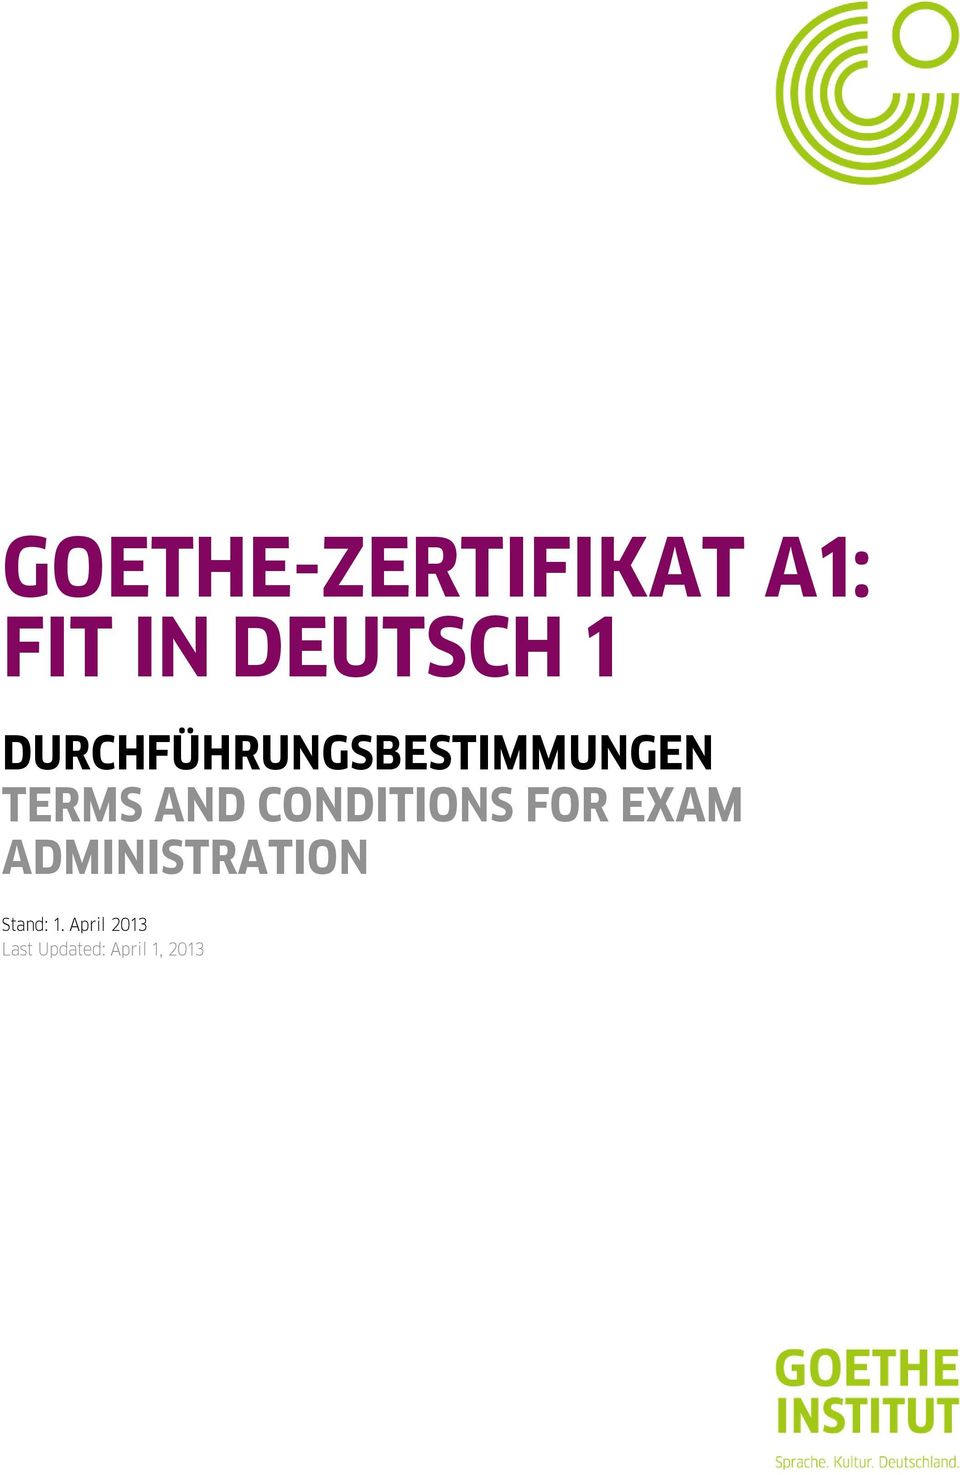 CONDITIONS FOR EXAM ADMINISTRATION